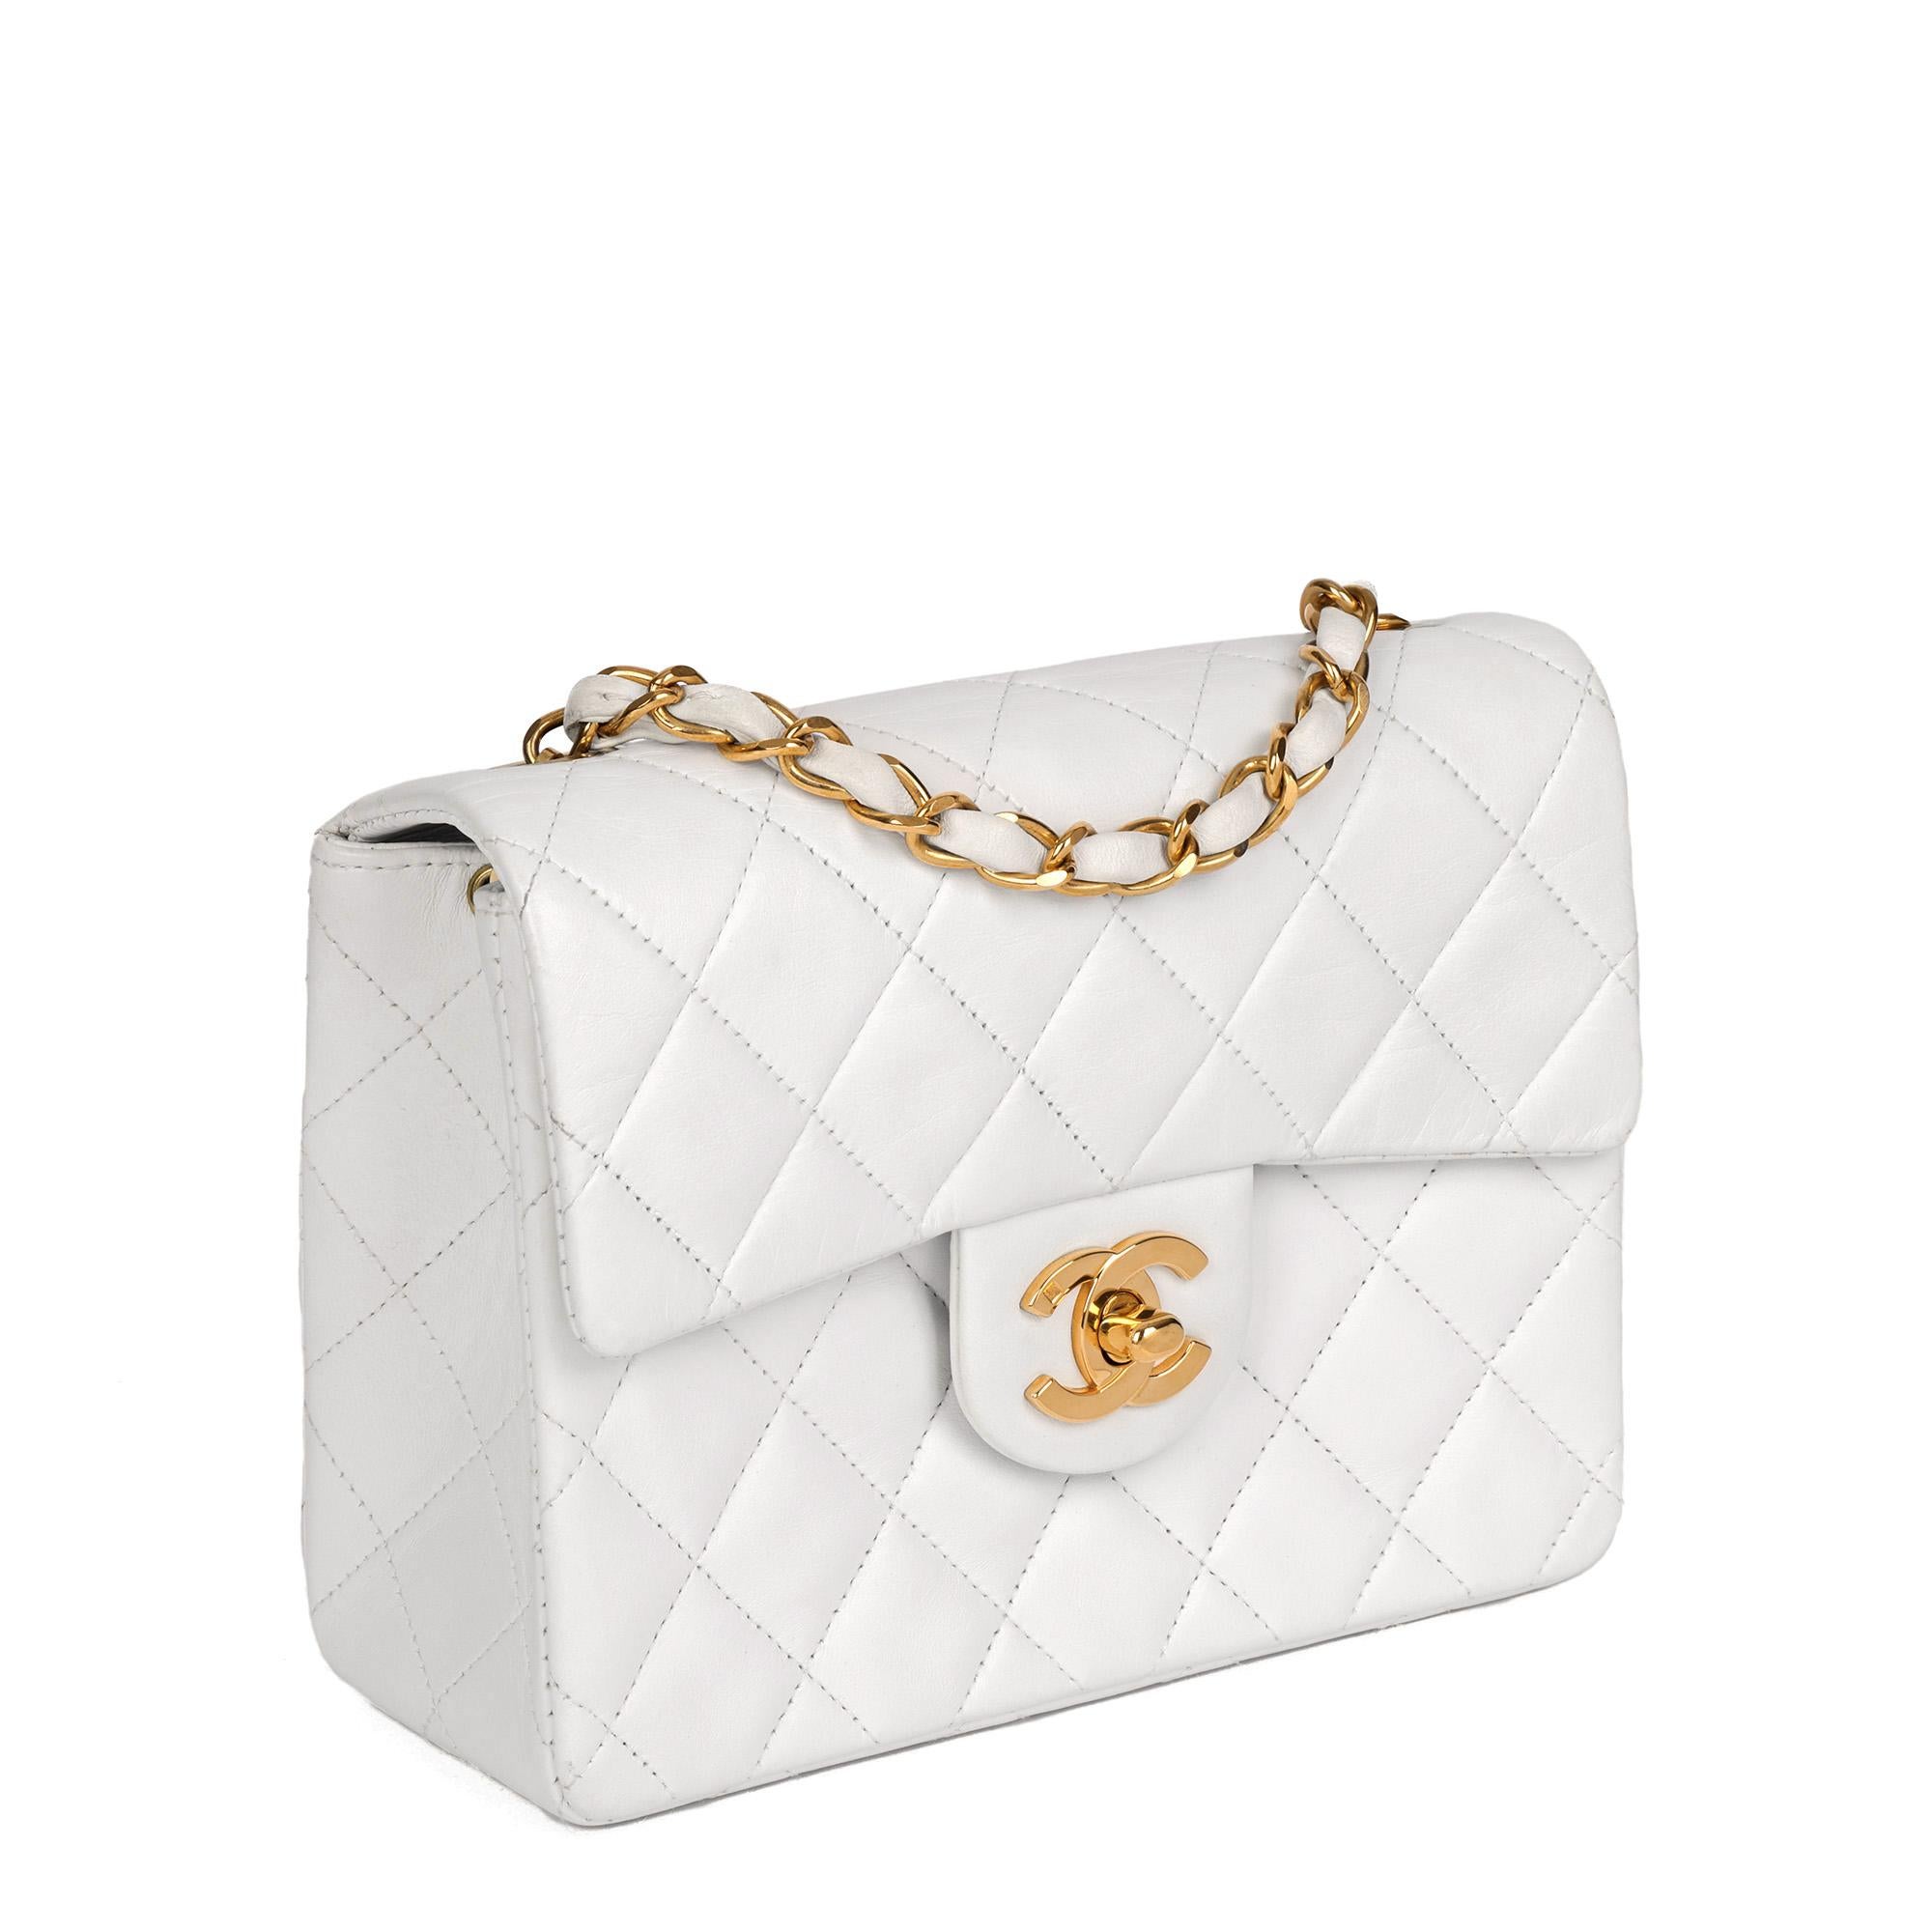 CHANEL
White Quilted Lambskin Vintage Square Mini Flap Bag

Xupes Reference: HB4726
Serial Number: 4331682
Age (Circa): 1997
Accompanied By: Chanel Dust Bag, Authenticity Card
Authenticity Details: Authenticity Card, Serial Sticker (Made in